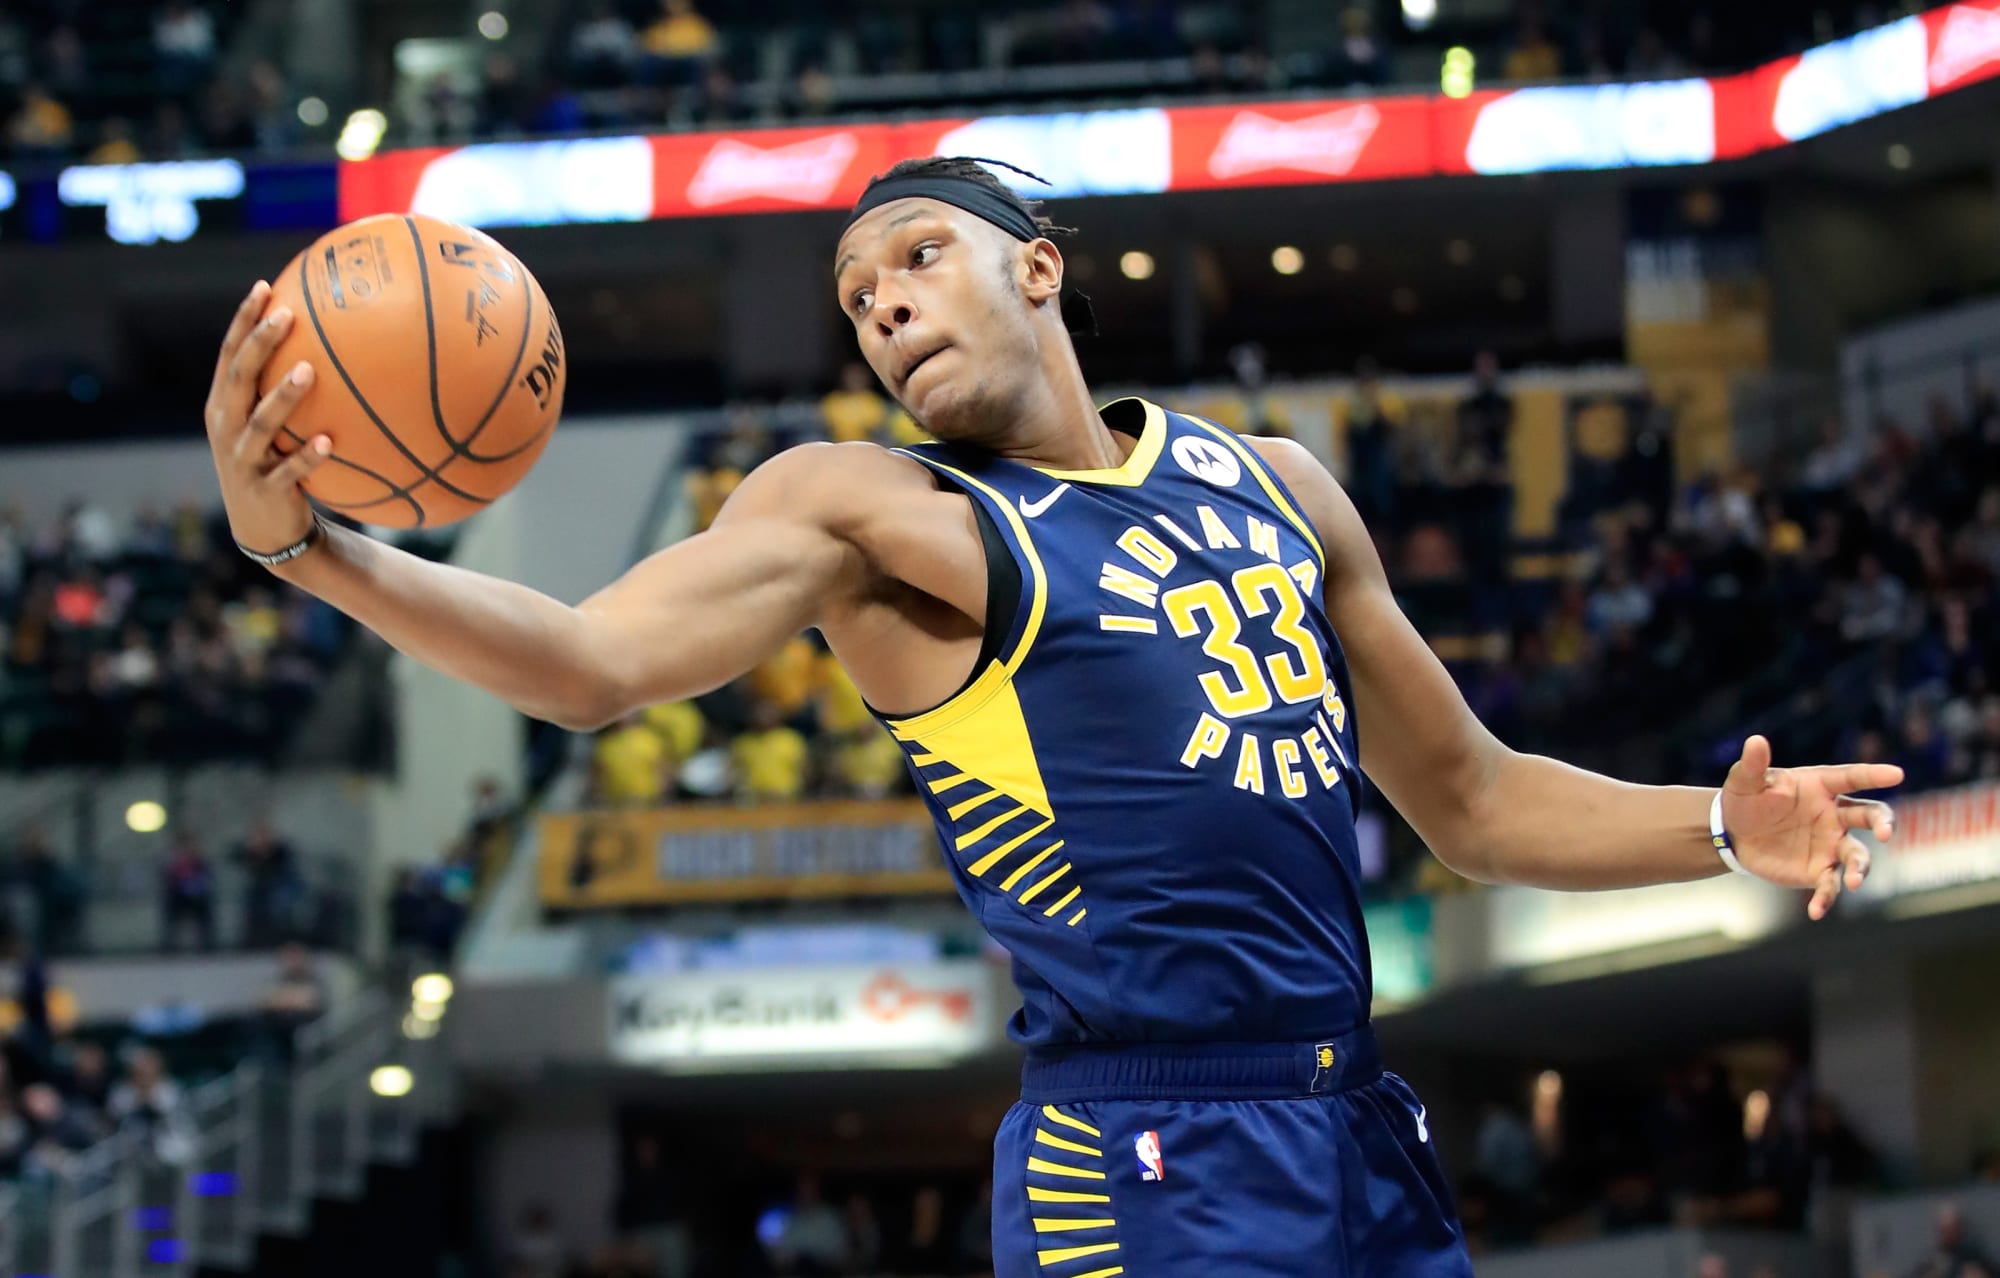 Myles Turner's rebounding has improved, and his defense remains elite